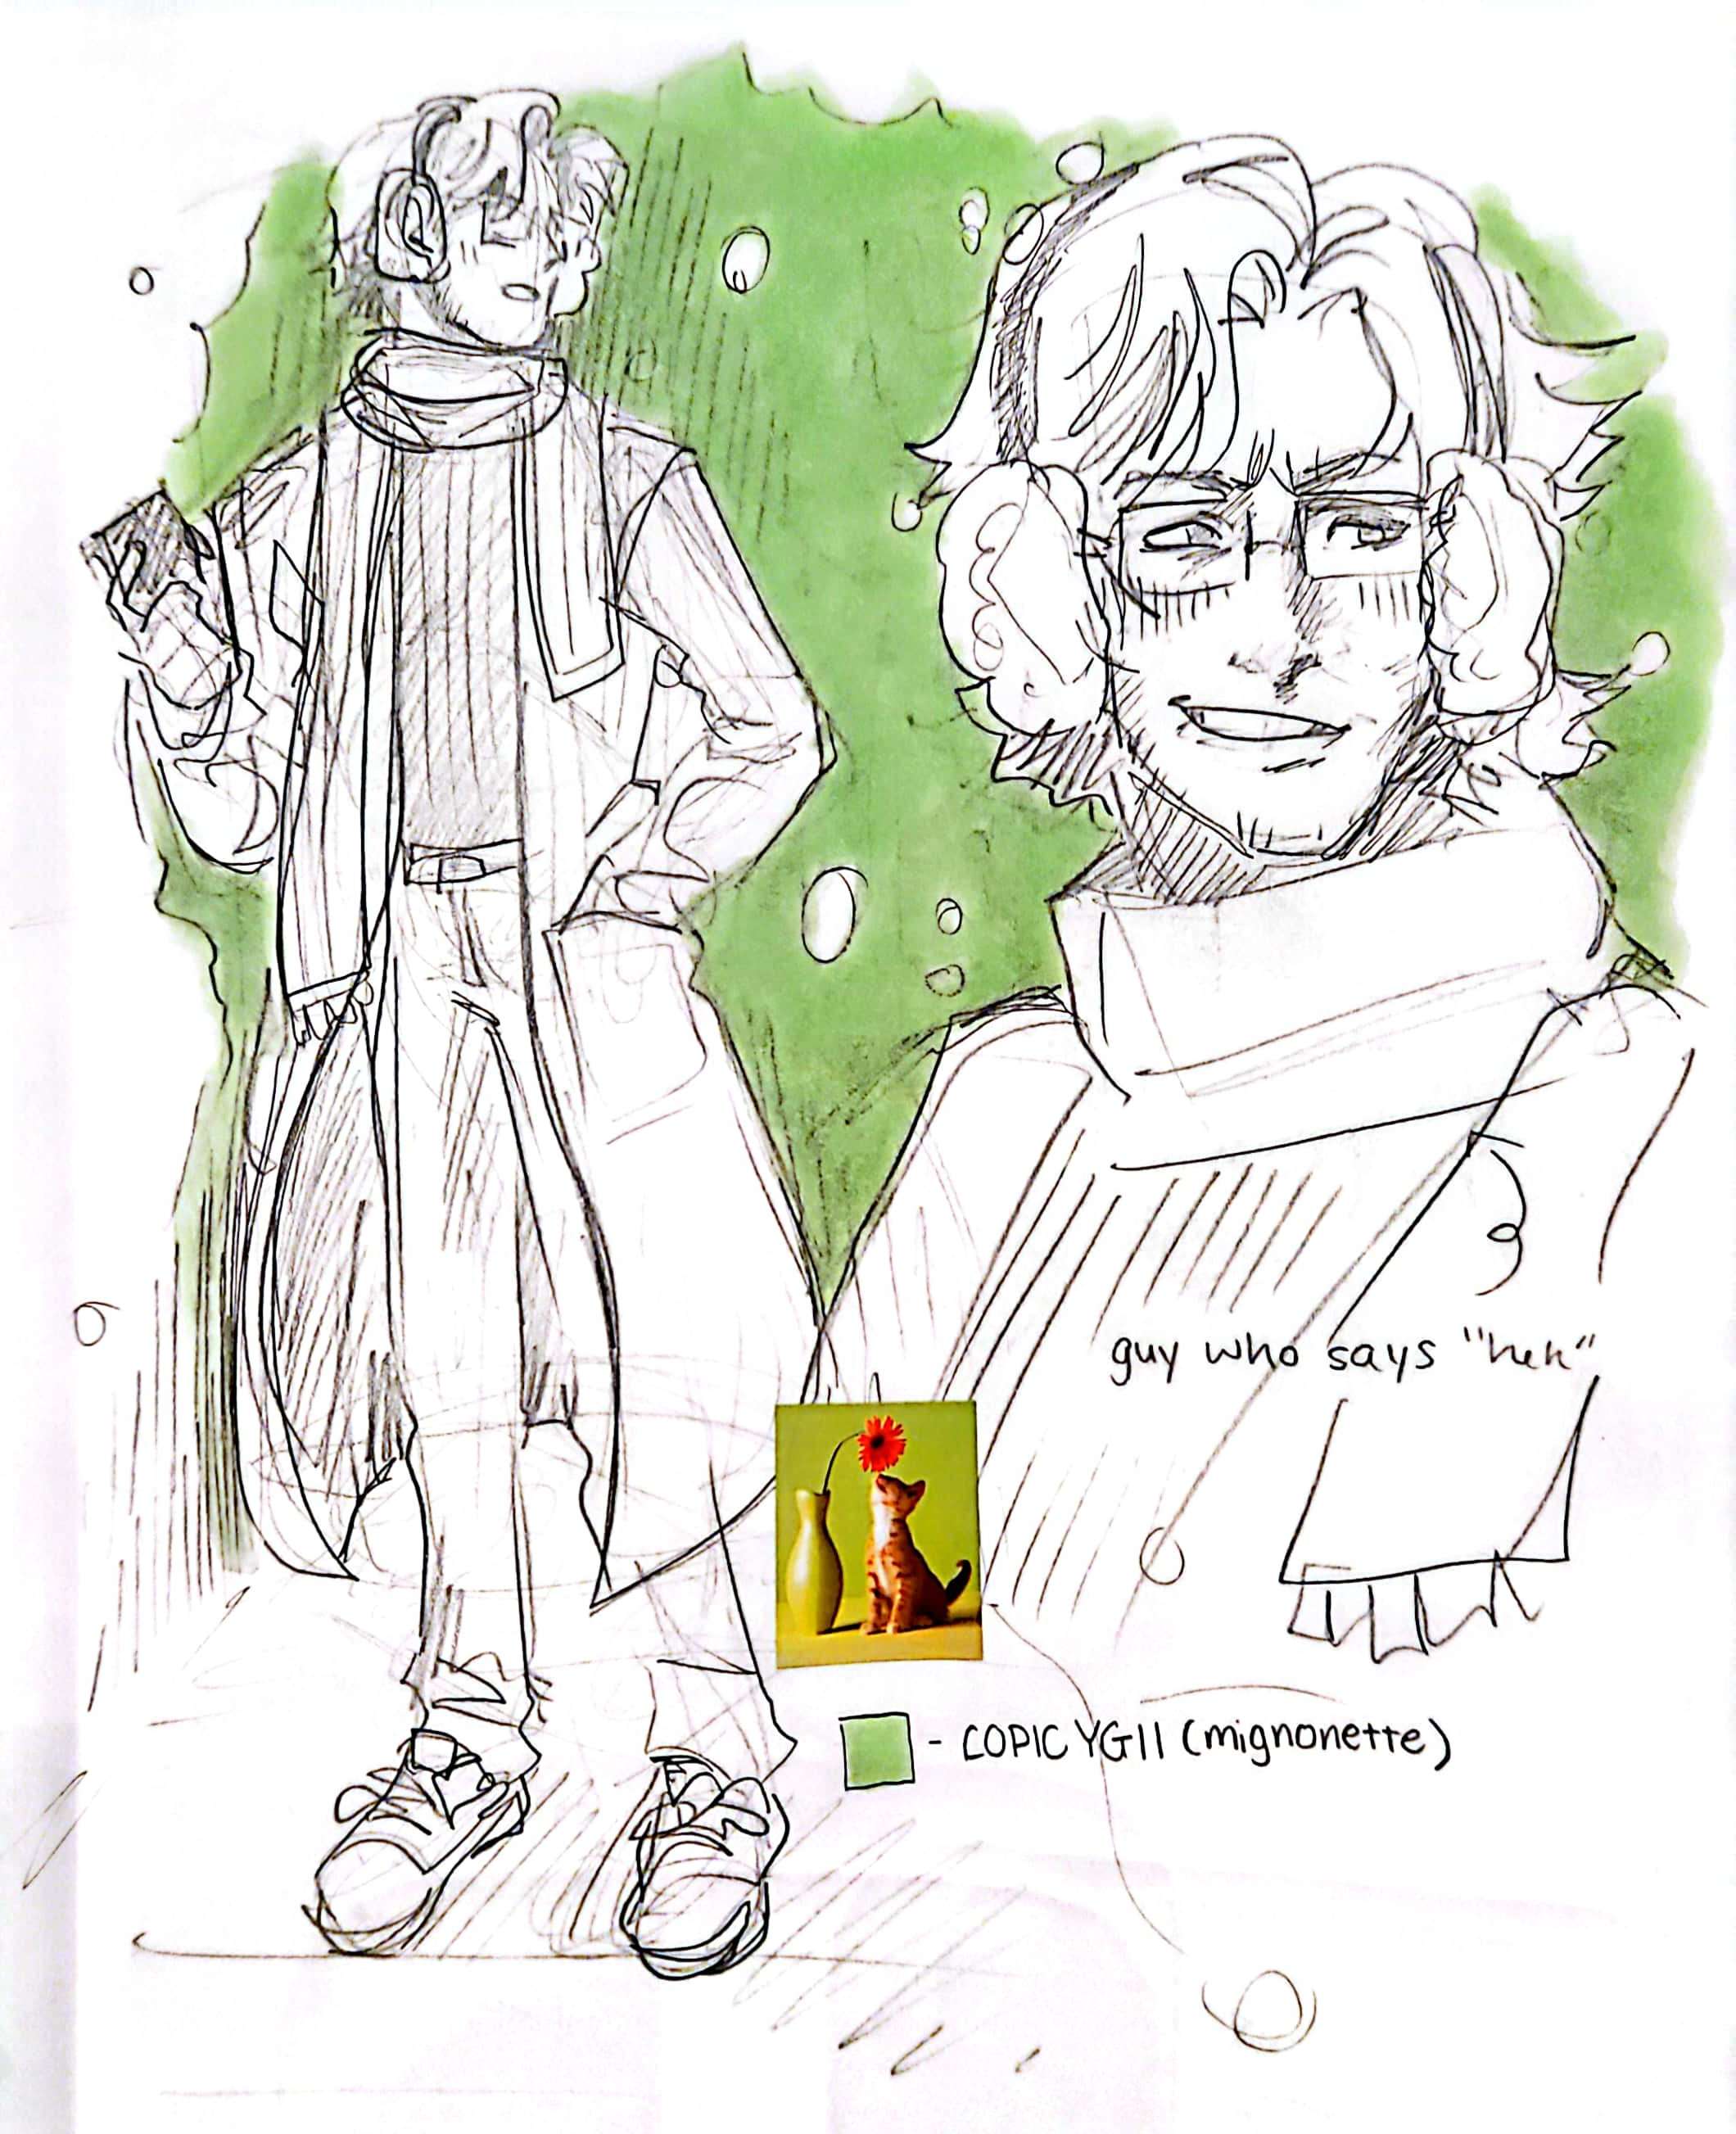 A fullbody sketch of Otacon in a winter outfit (scarf around his neck, earmuffs and a long coat), to the right is a portrait of him smiling awkwardly, flushed from the cold. The background is colored green with a copic marker and there's a random green cat sticker in between the sketches